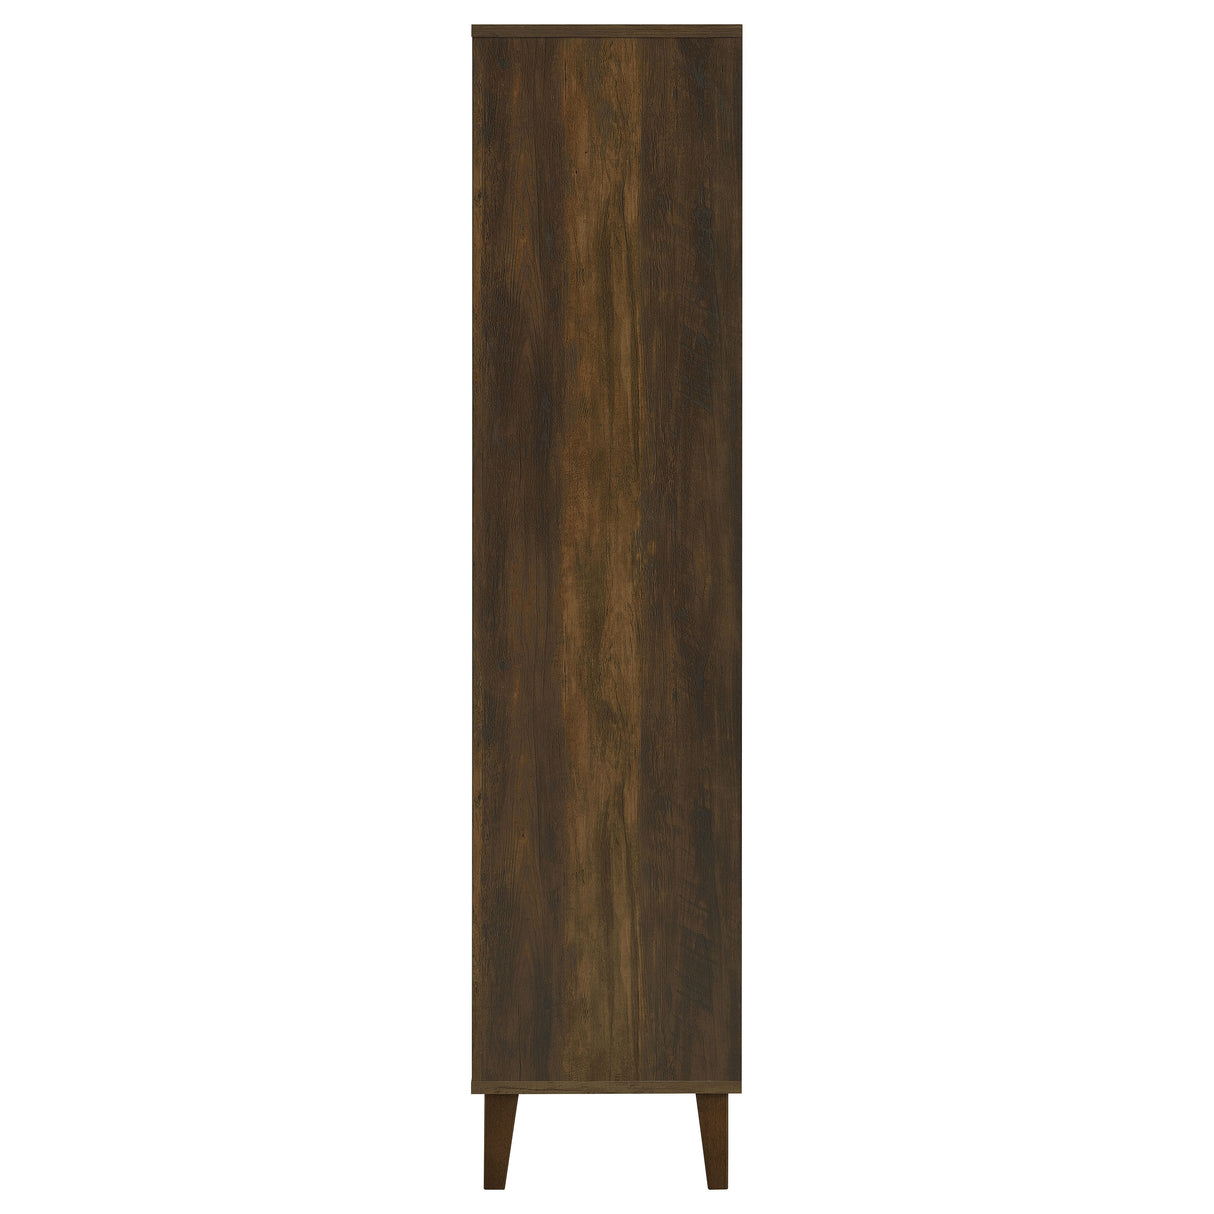 Tall Accent Cabinet - Elouise 4-door Engineered Wood Tall Accent Cabinet Dark Pine